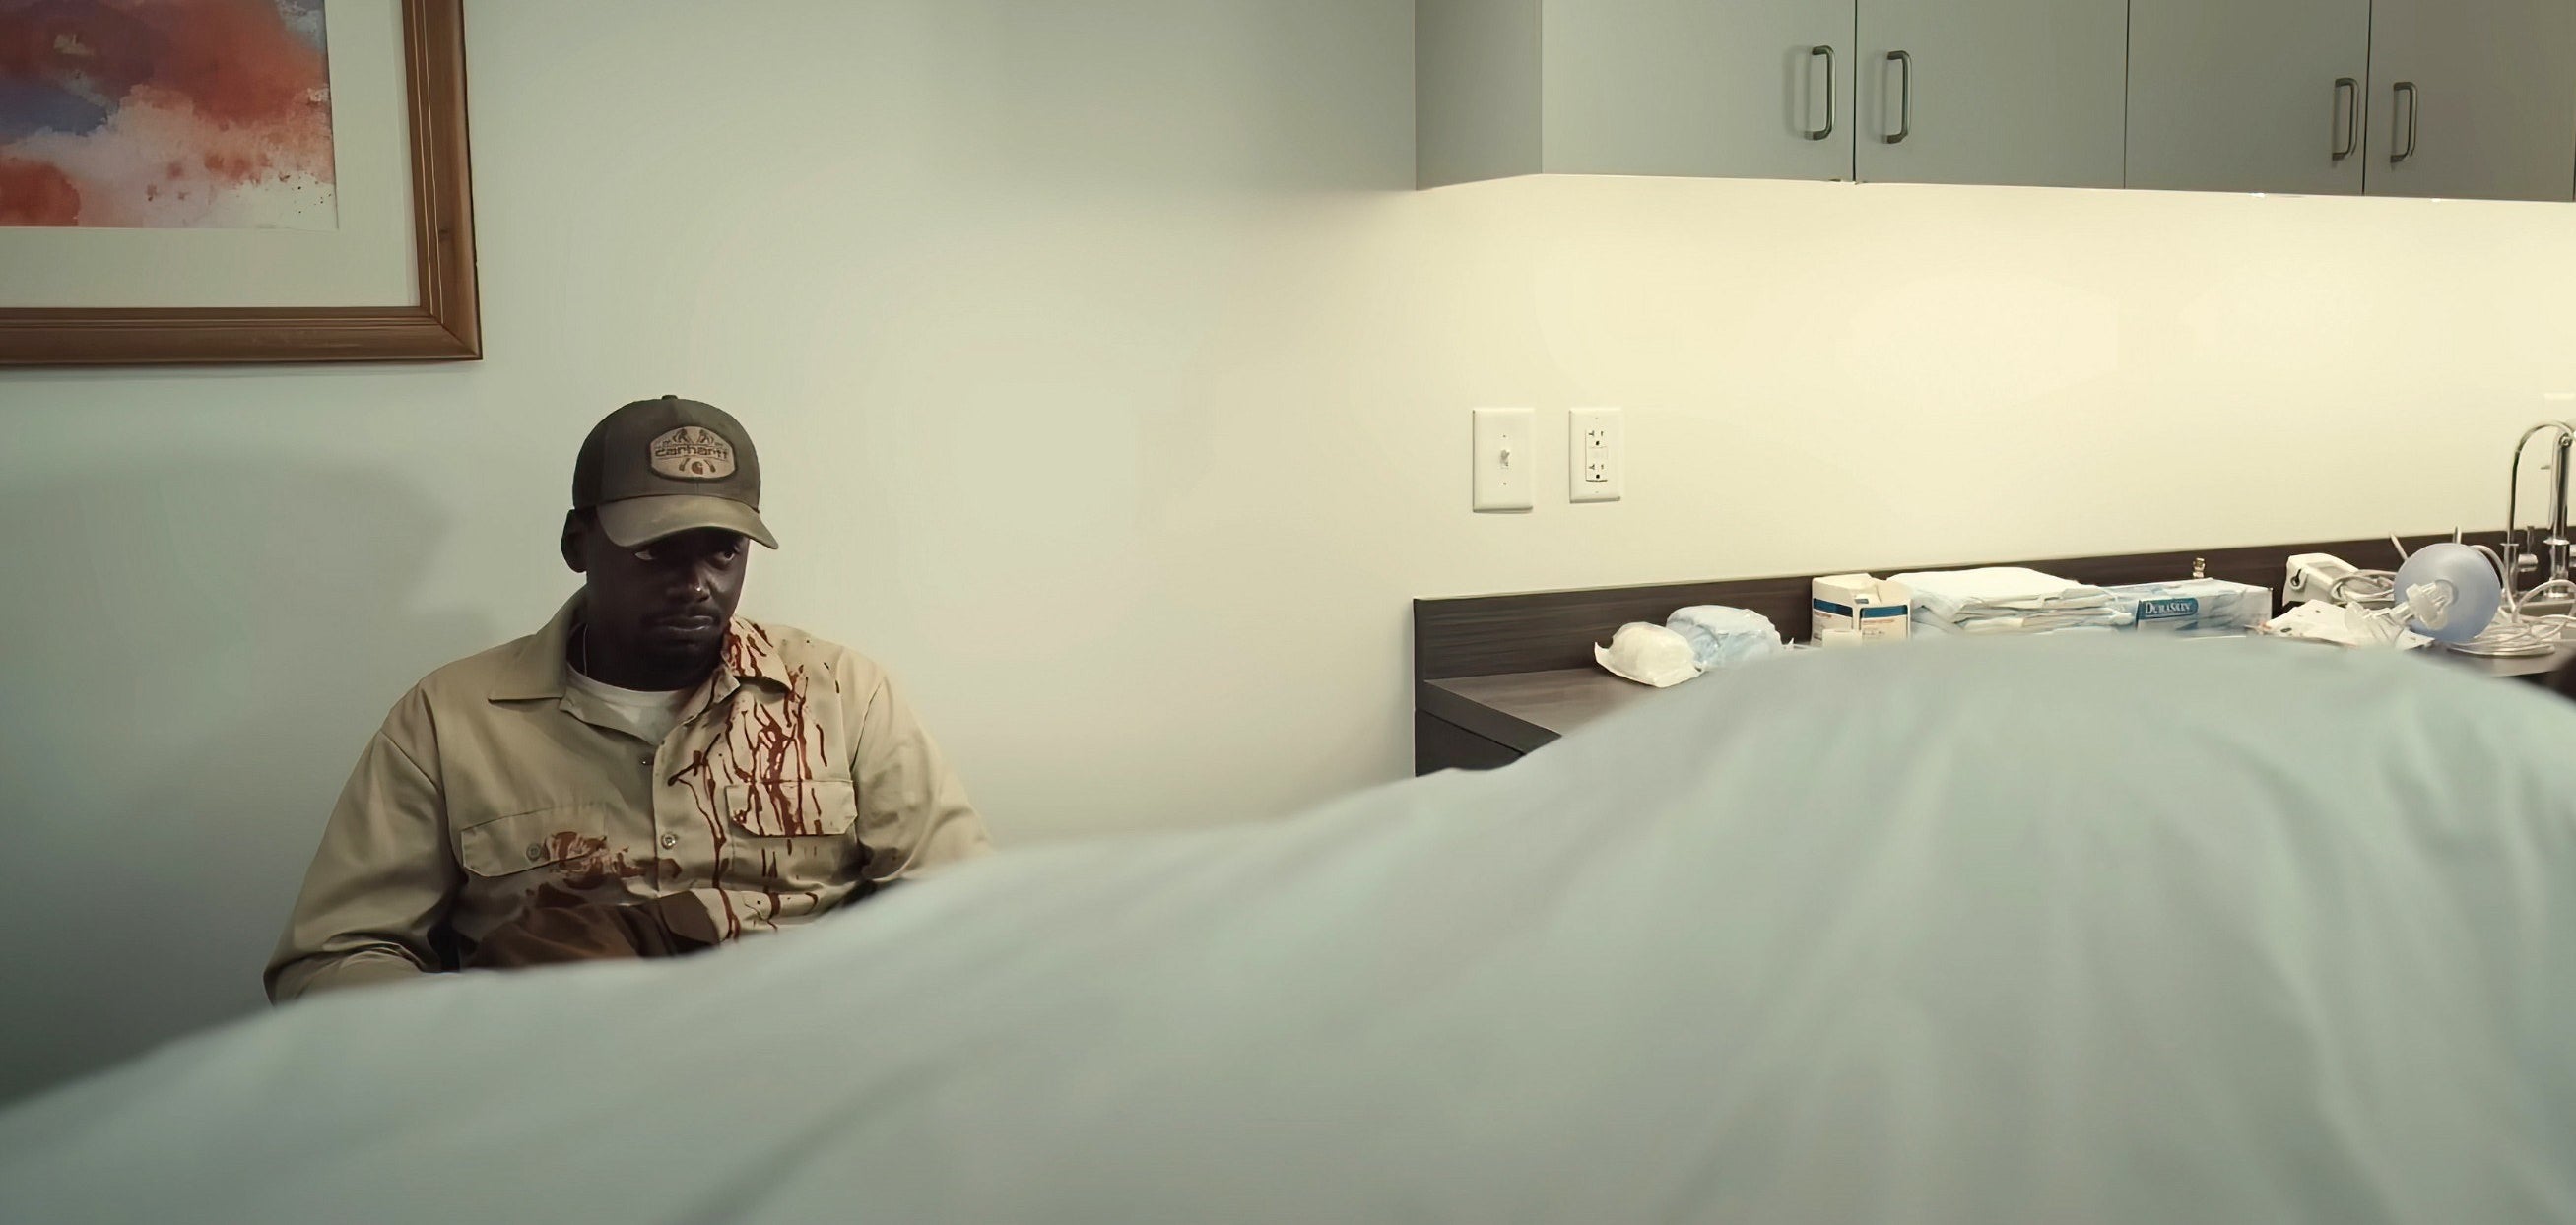 OJ in a hospital room covered in blood